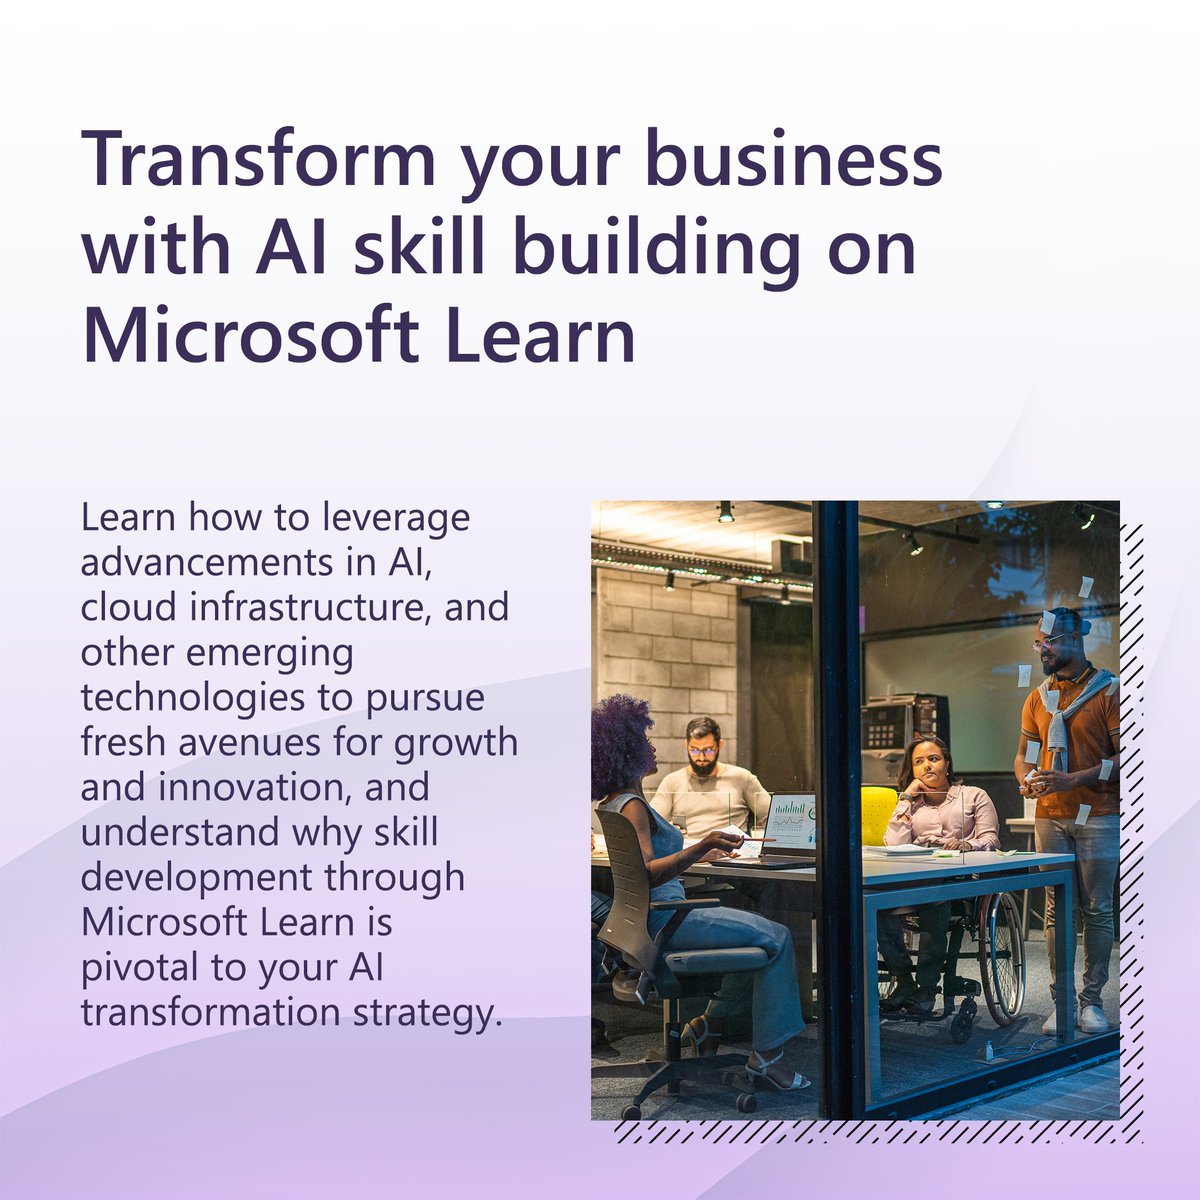 Don't let an AI skills gap hold you back. 📣 Join millions on Microsoft Learn and become eligible for a free Microsoft Certification exam (terms and conditions apply). Learn more: msft.it/6011Y3ED5